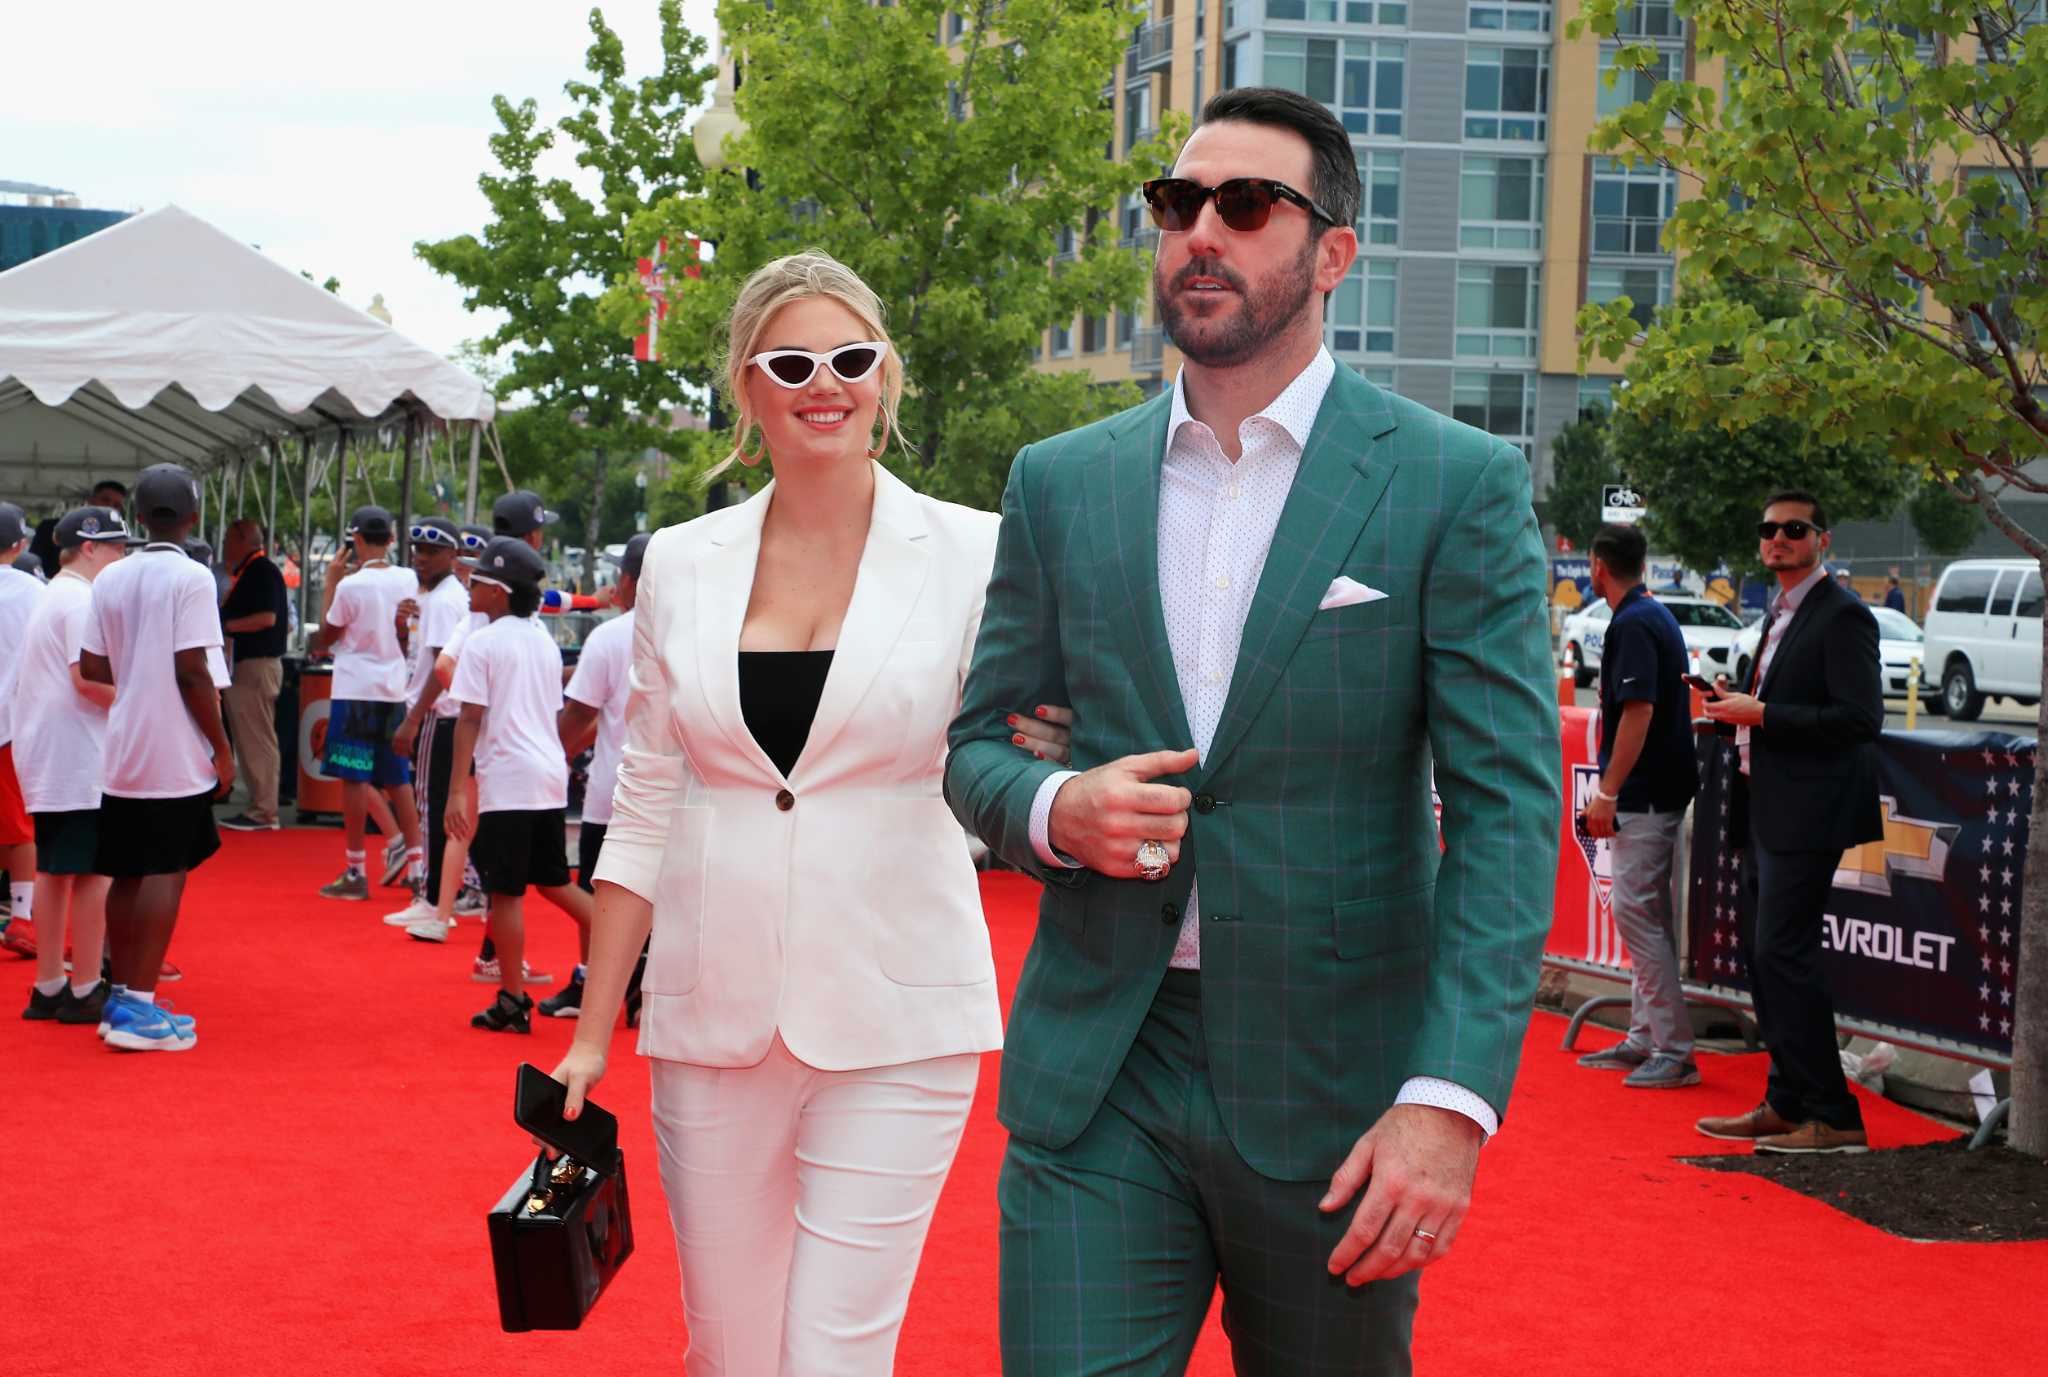 MLB players walk the red carpet to All-Star Game